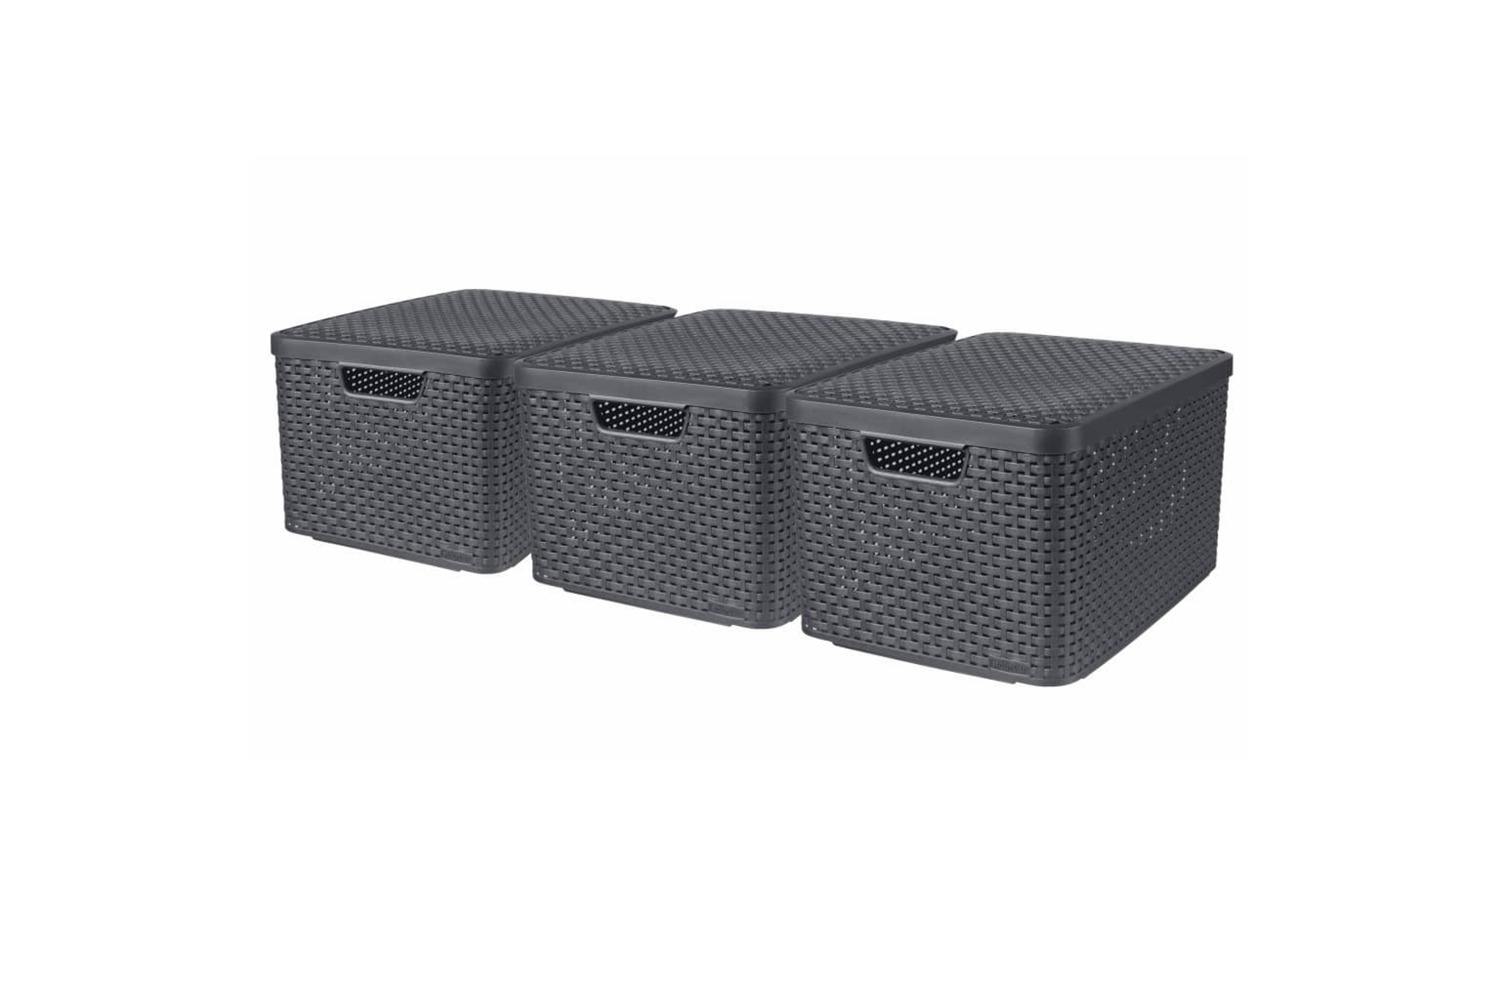 Curver 427235 Style Storage Boxes With Lid 3 Pcs Size L Anthracite